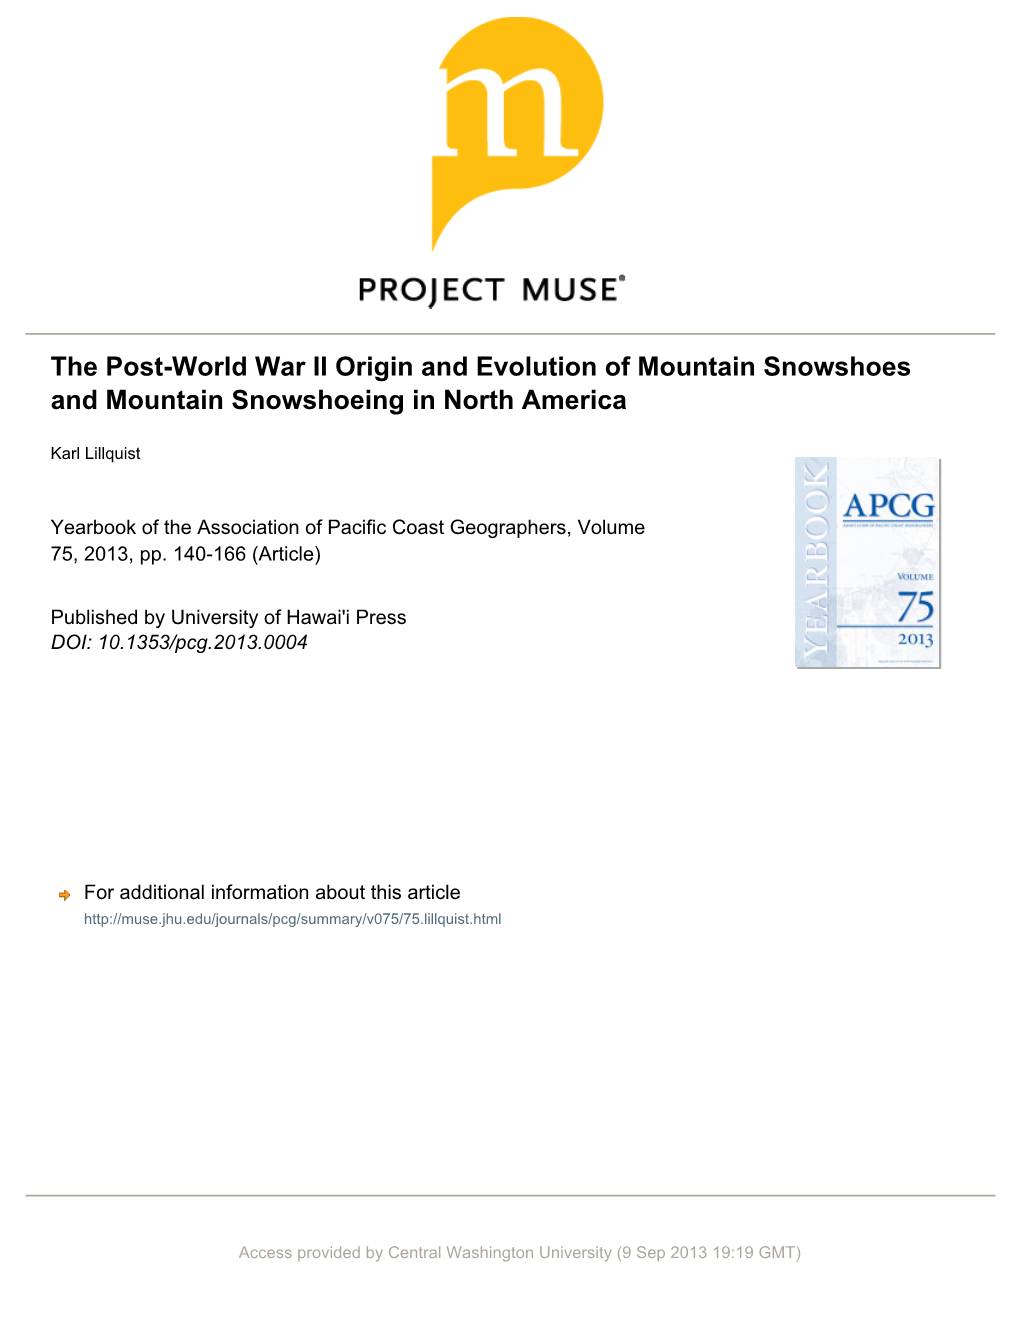 The Post-World War II Origin and Evolution of Mountain Snowshoes and Mountain Snowshoeing in North America